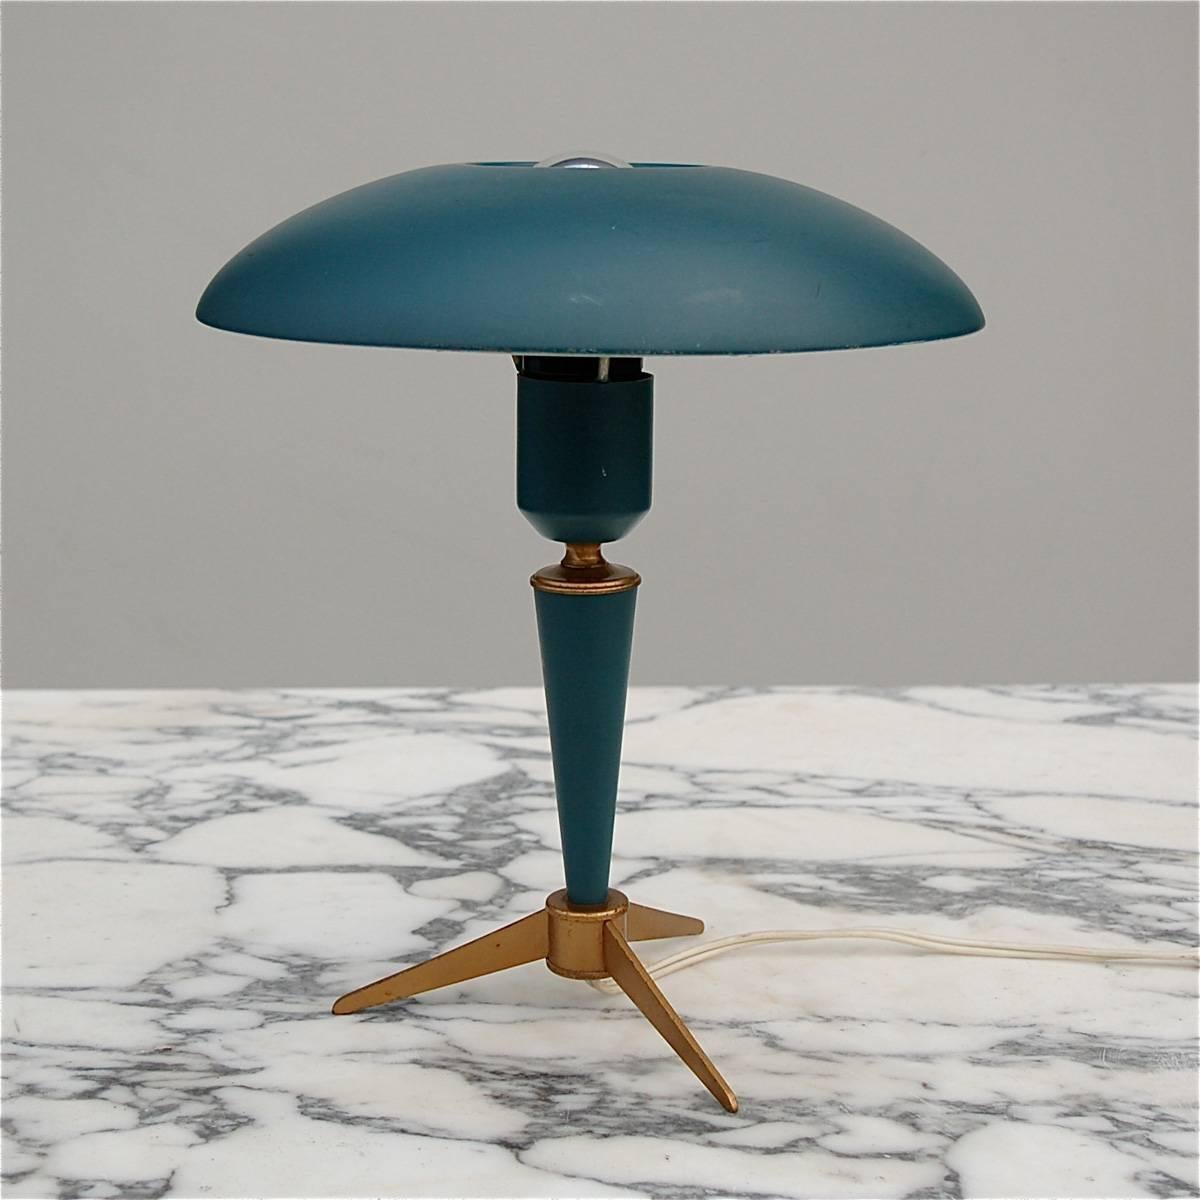 The design of this table lamp by Louis Kalff has something outer-worldly about it, not surprisingly as it dates back to the late 1950s, the age synonymous with space exploration. The lamp rests on a brass tripod and still has its original blue